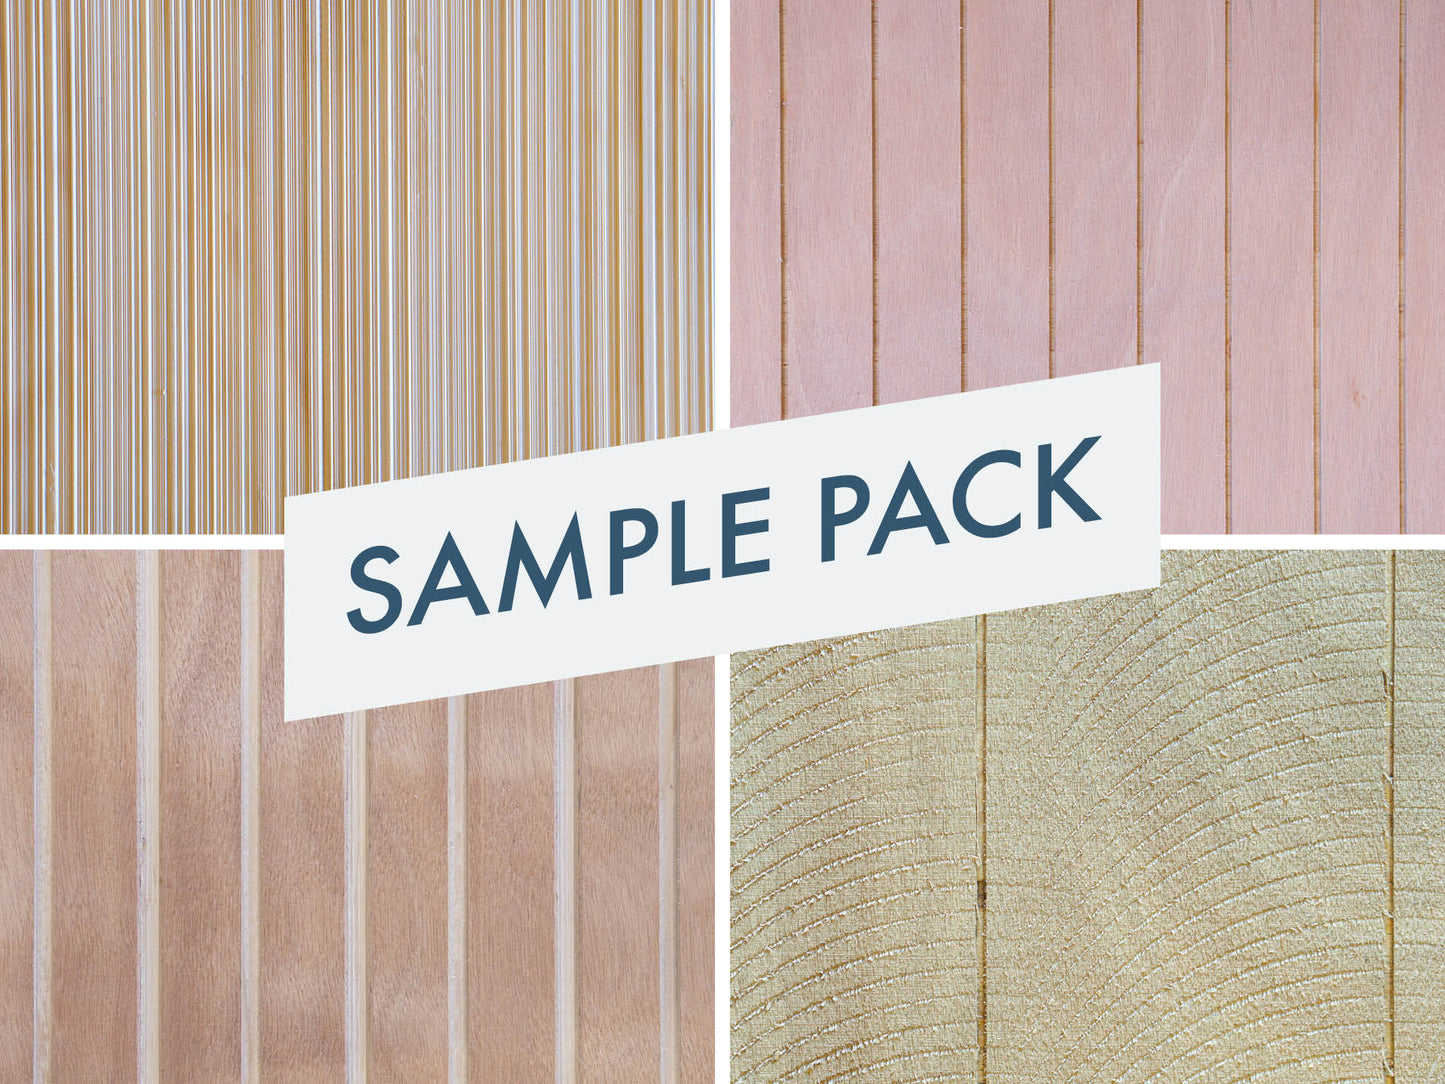 Grid of four photos featuring close up shots of the four patterns offered by Vintage Plywood Millworks with the text "Sample Pack" across the front